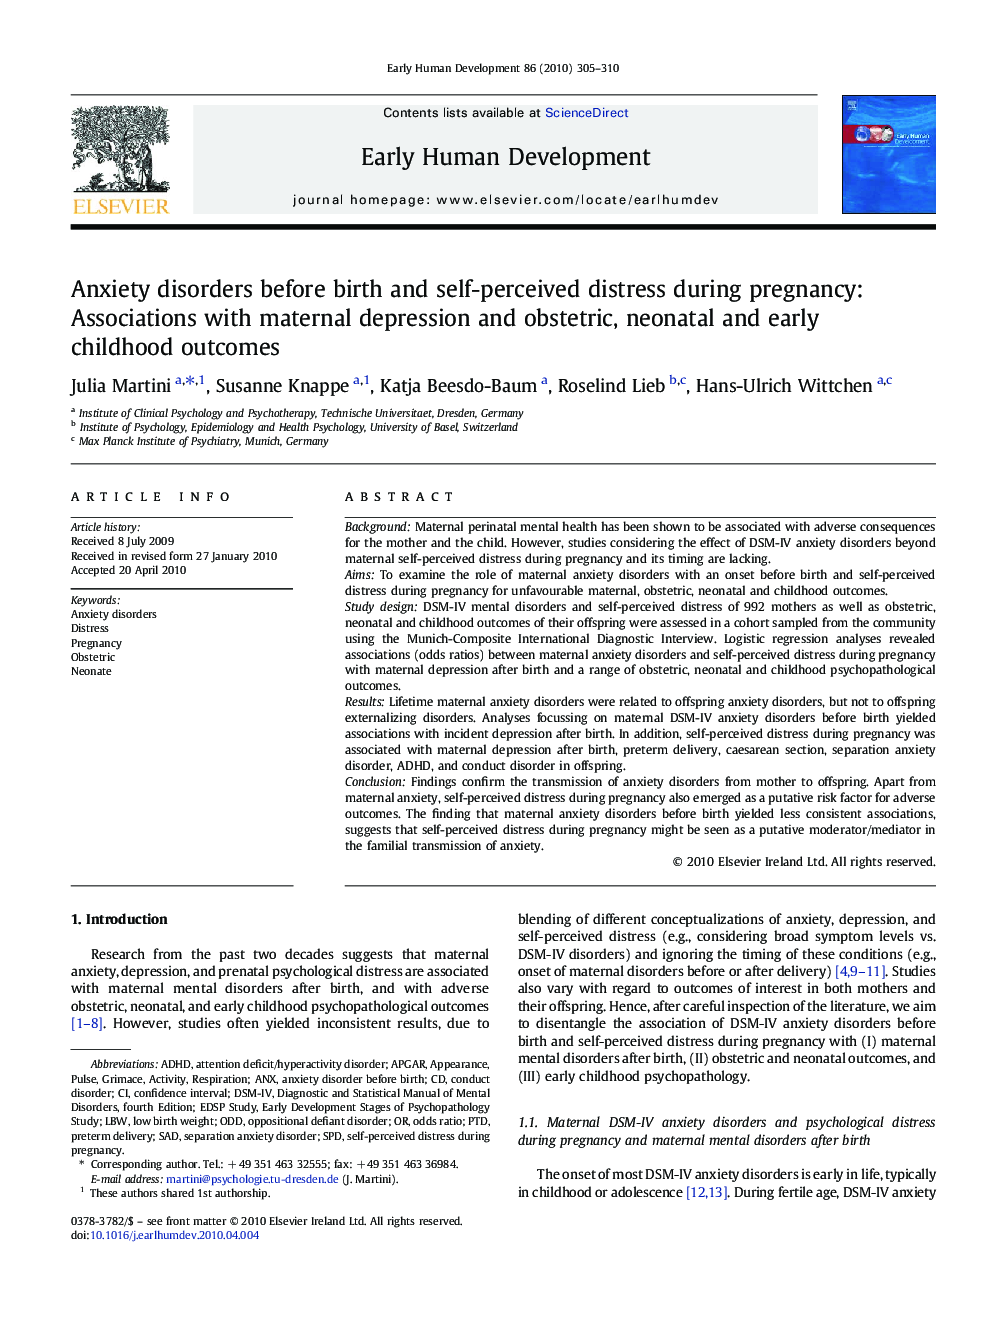 Anxiety disorders before birth and self-perceived distress during pregnancy: Associations with maternal depression and obstetric, neonatal and early childhood outcomes